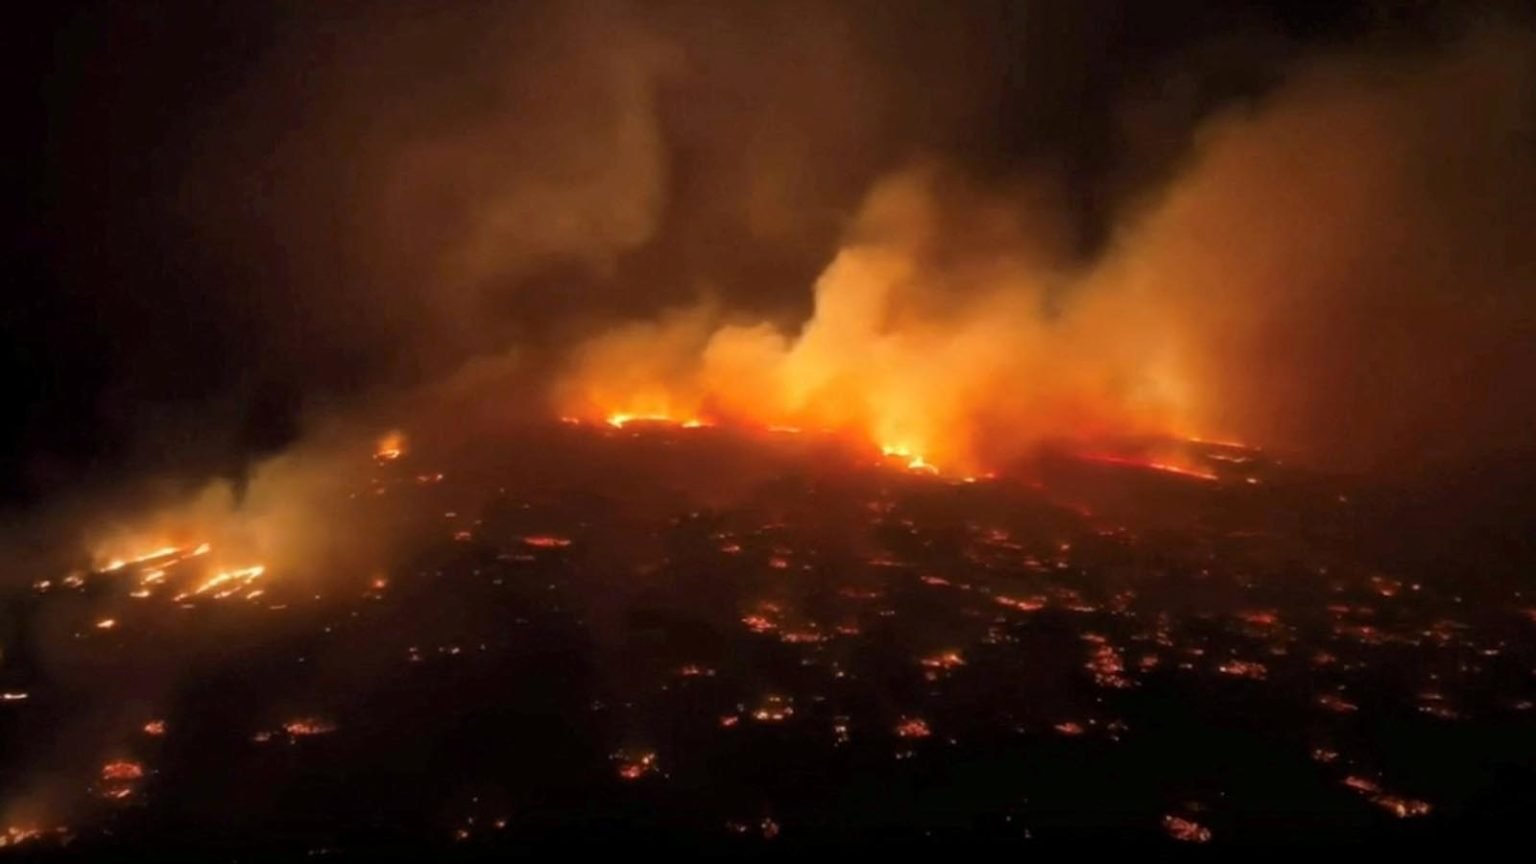 Dems’ Climate Change Claim Debunked - Maui Officials Reveal Cause of the Wildfires